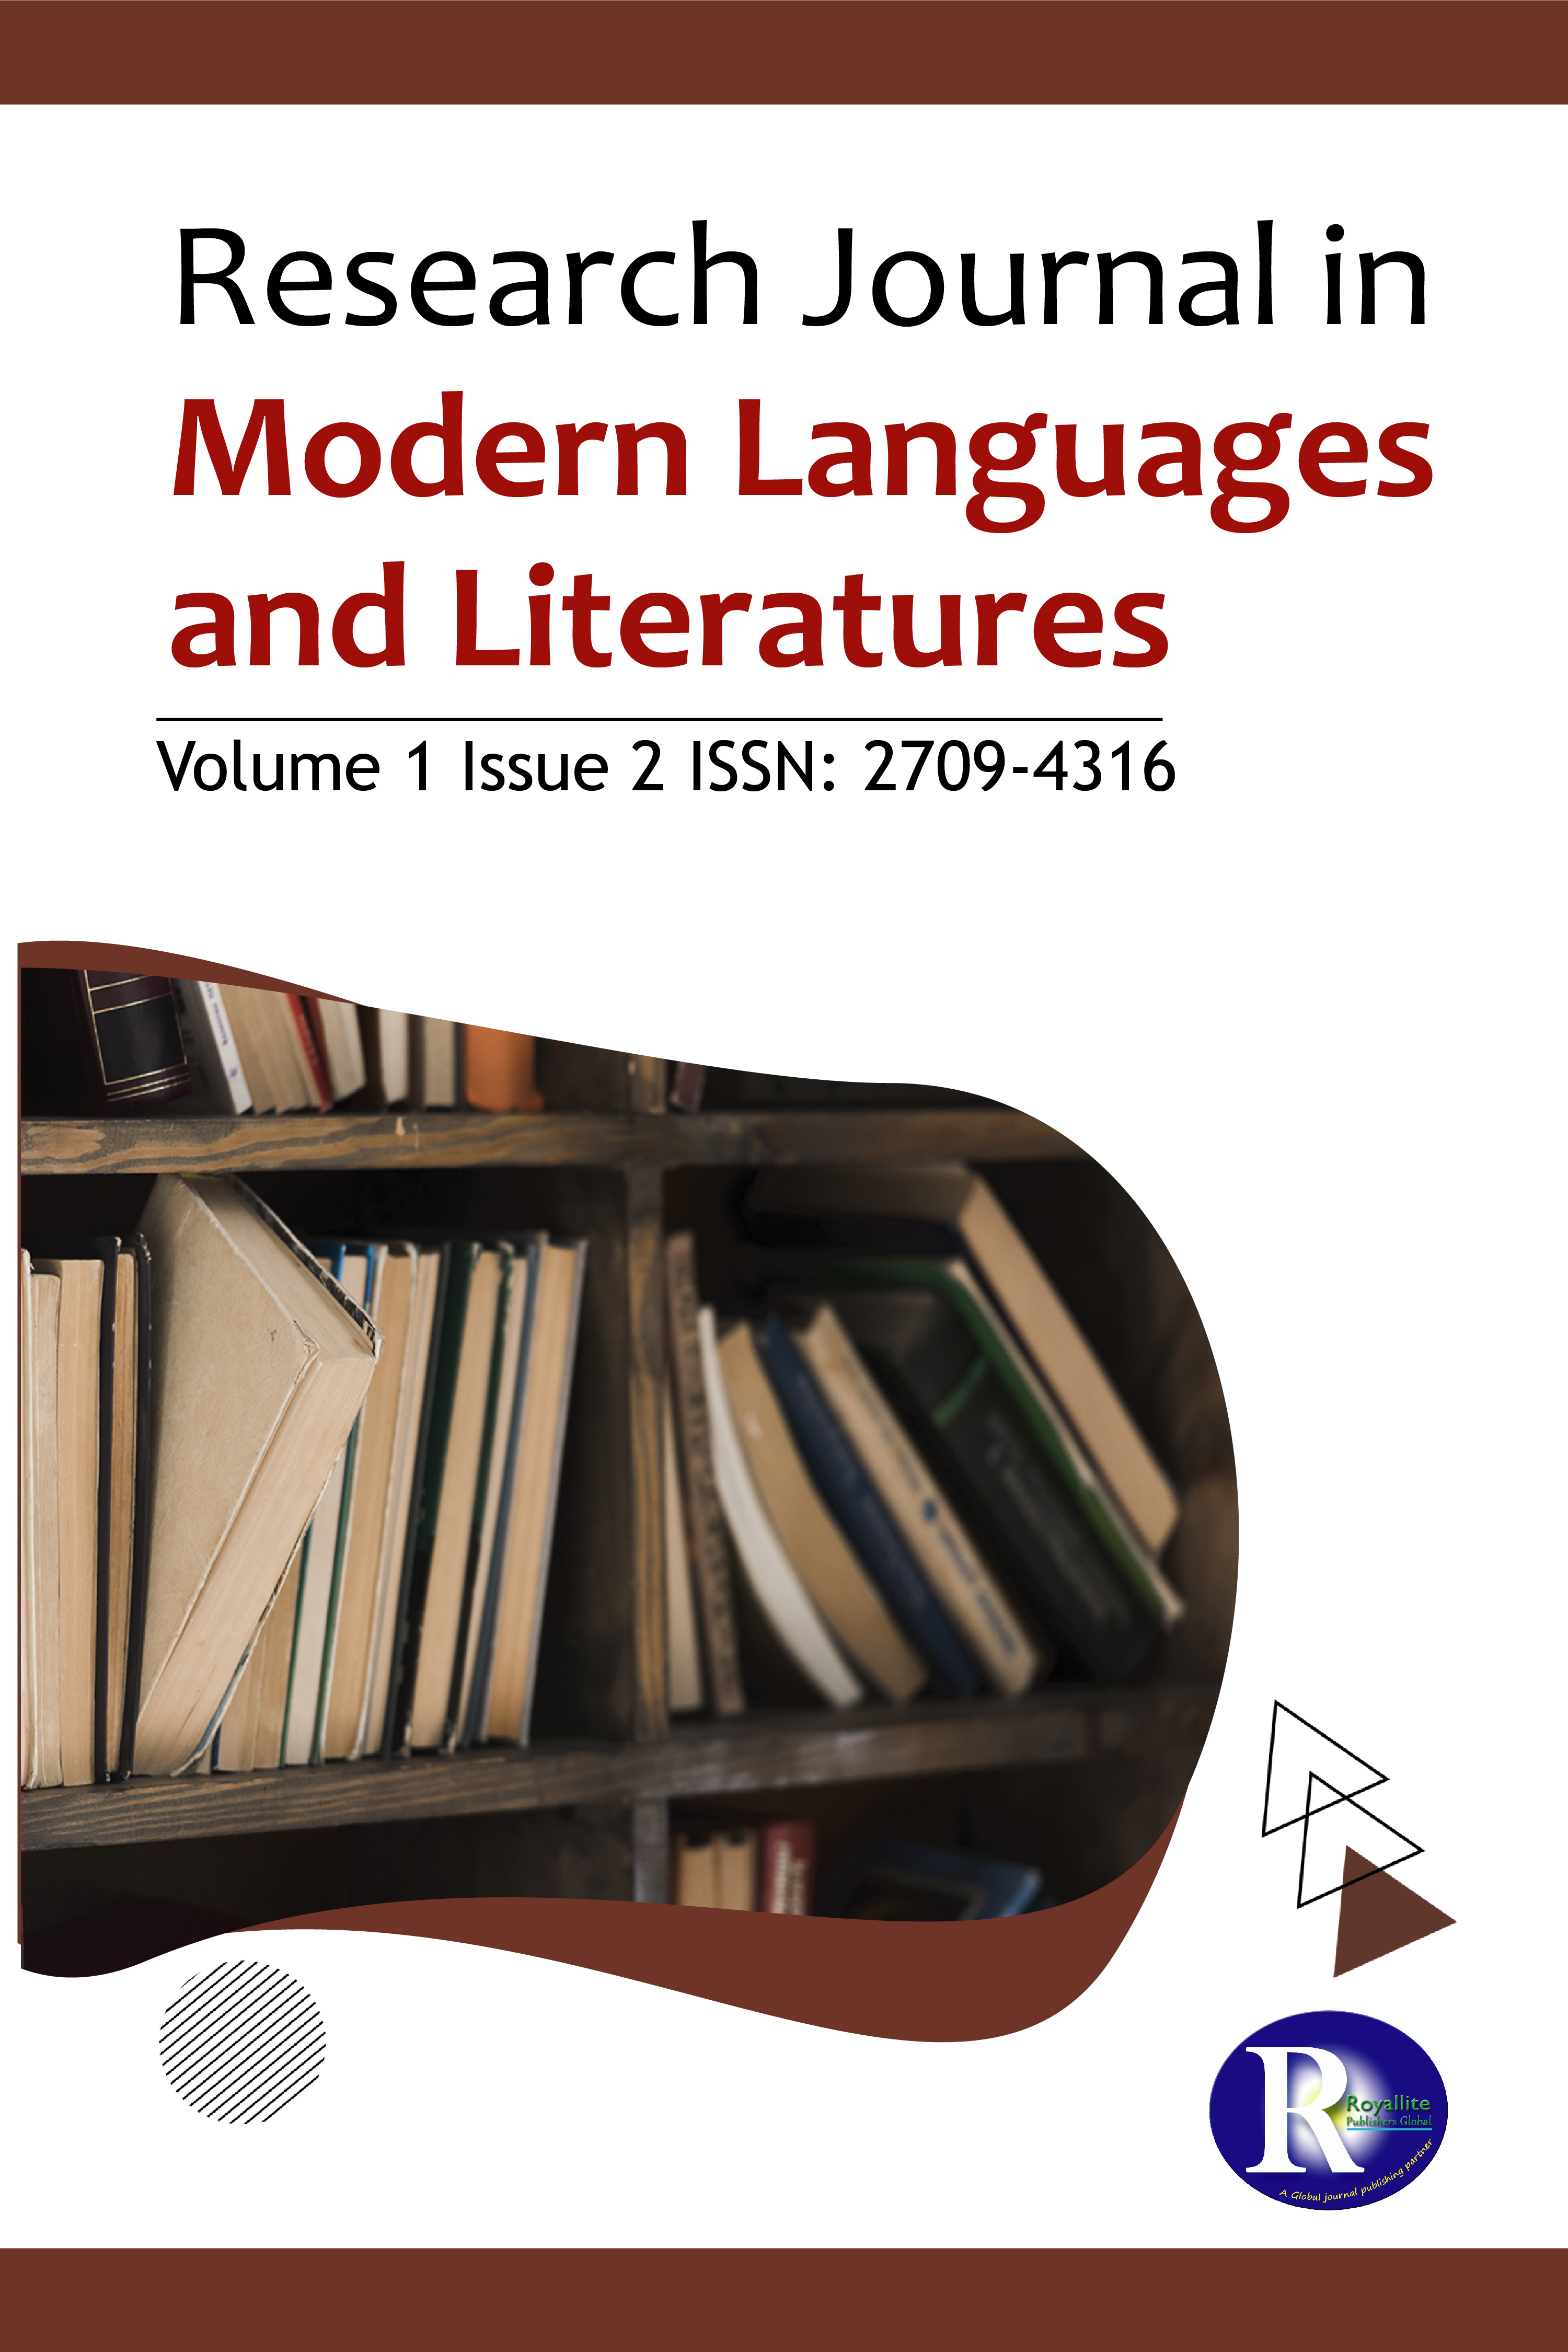 research in language journal